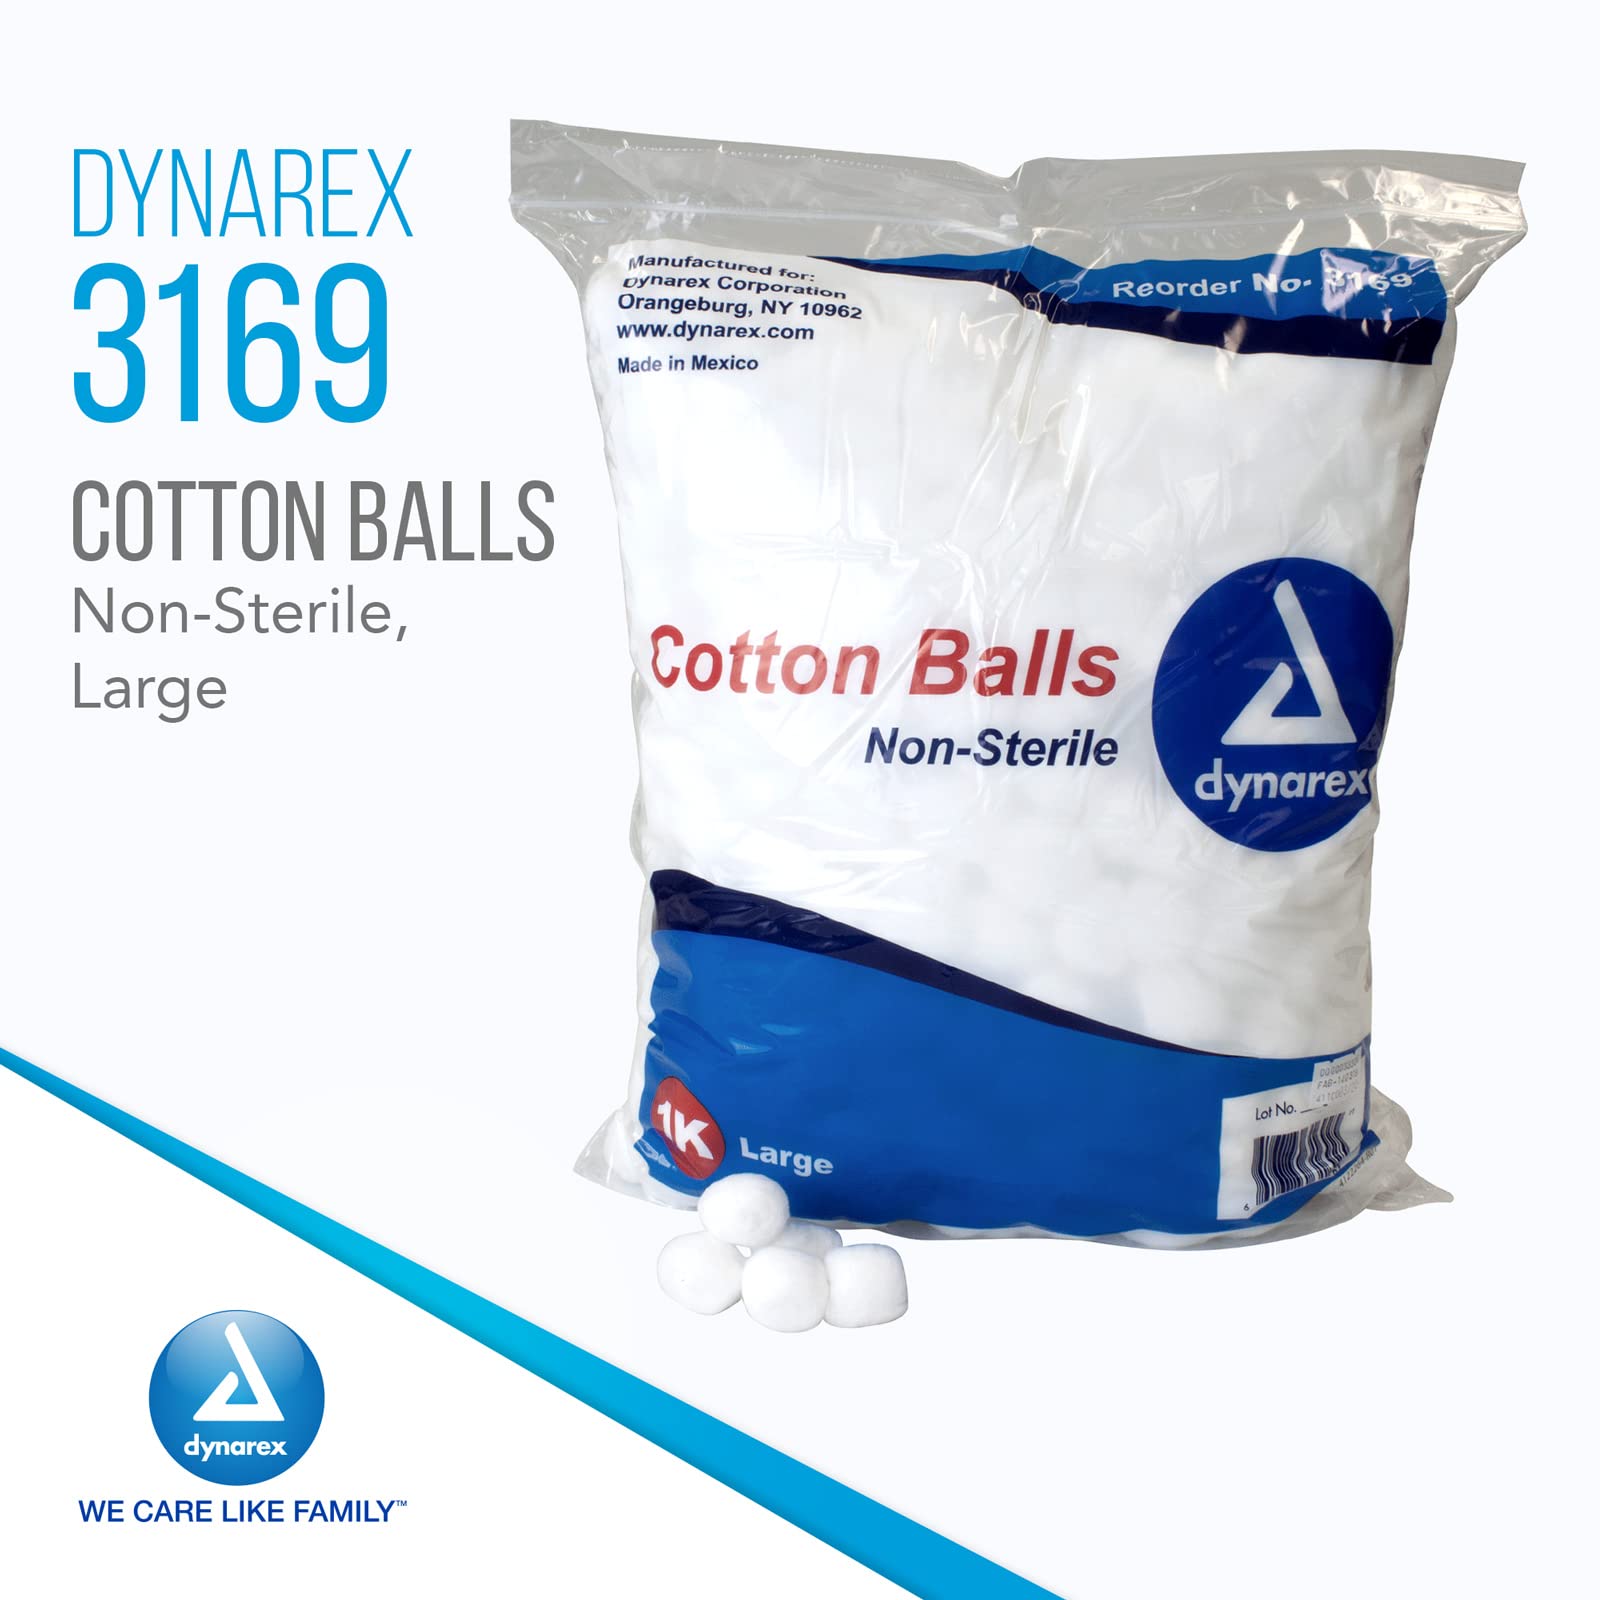 Dynarex Cotton Balls, Non-Sterile and Large, Latex-Free and Absorbent, for Skin Cleansing, Crafts, & as Makeup Remover, Ships as 2 Bags of 1000 Cotton Balls Each, 1 Case of 2000 Dynarex Cotton Balls